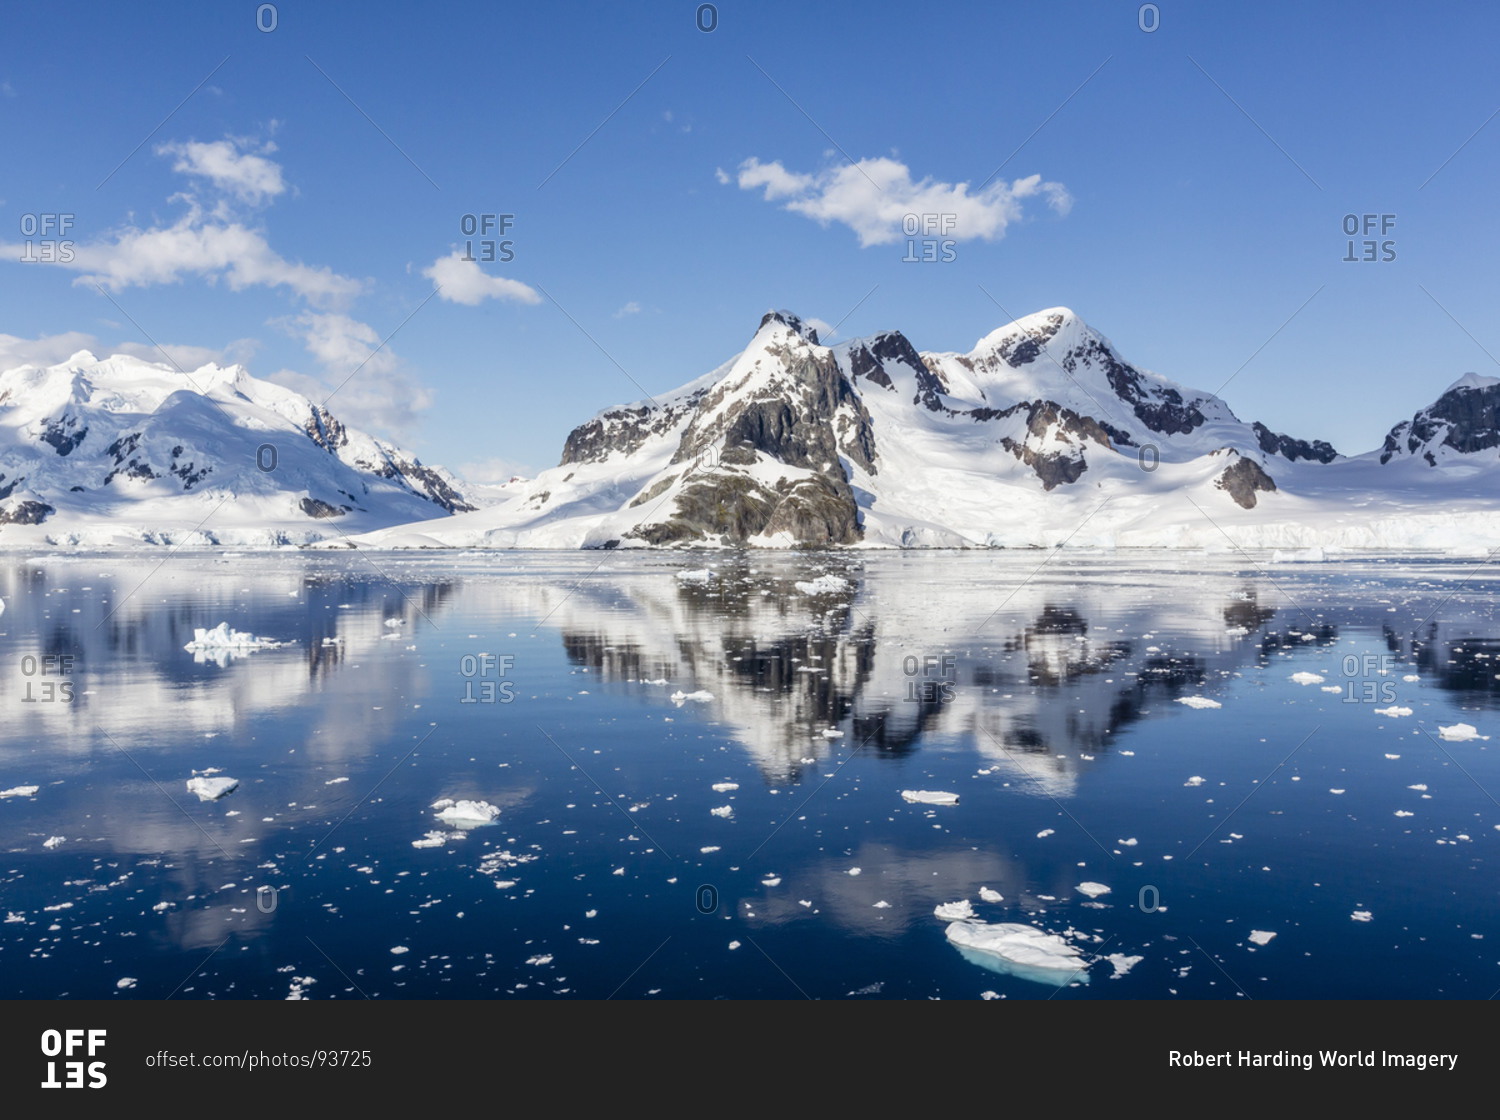 Snow-capped mountains in the Errera Channel on the western side of the Antarctic Peninsula, Antarctica, Southern Ocean, Polar Regions